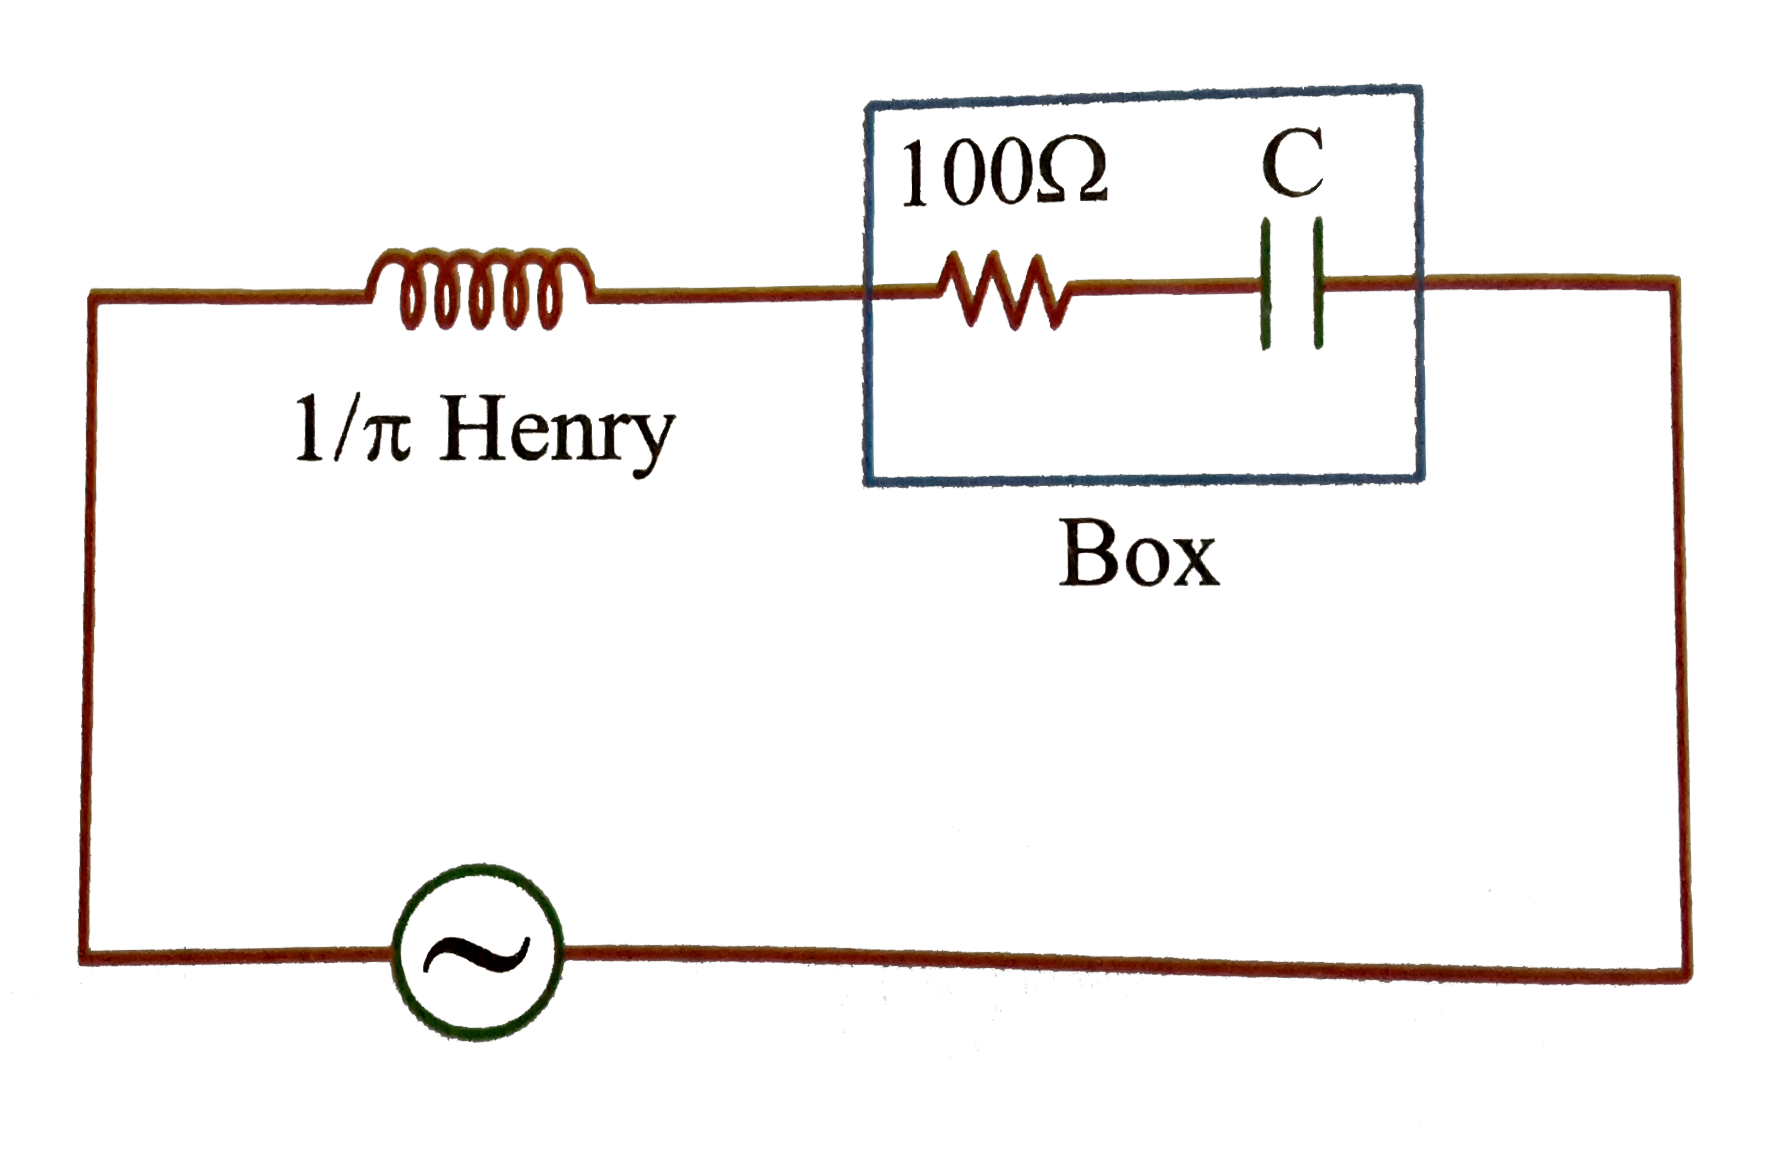 In the circuit, as shown in the figure, if the value of R.M.S current is 2.2 ampere, the power factor of the box is (E = 220 V)